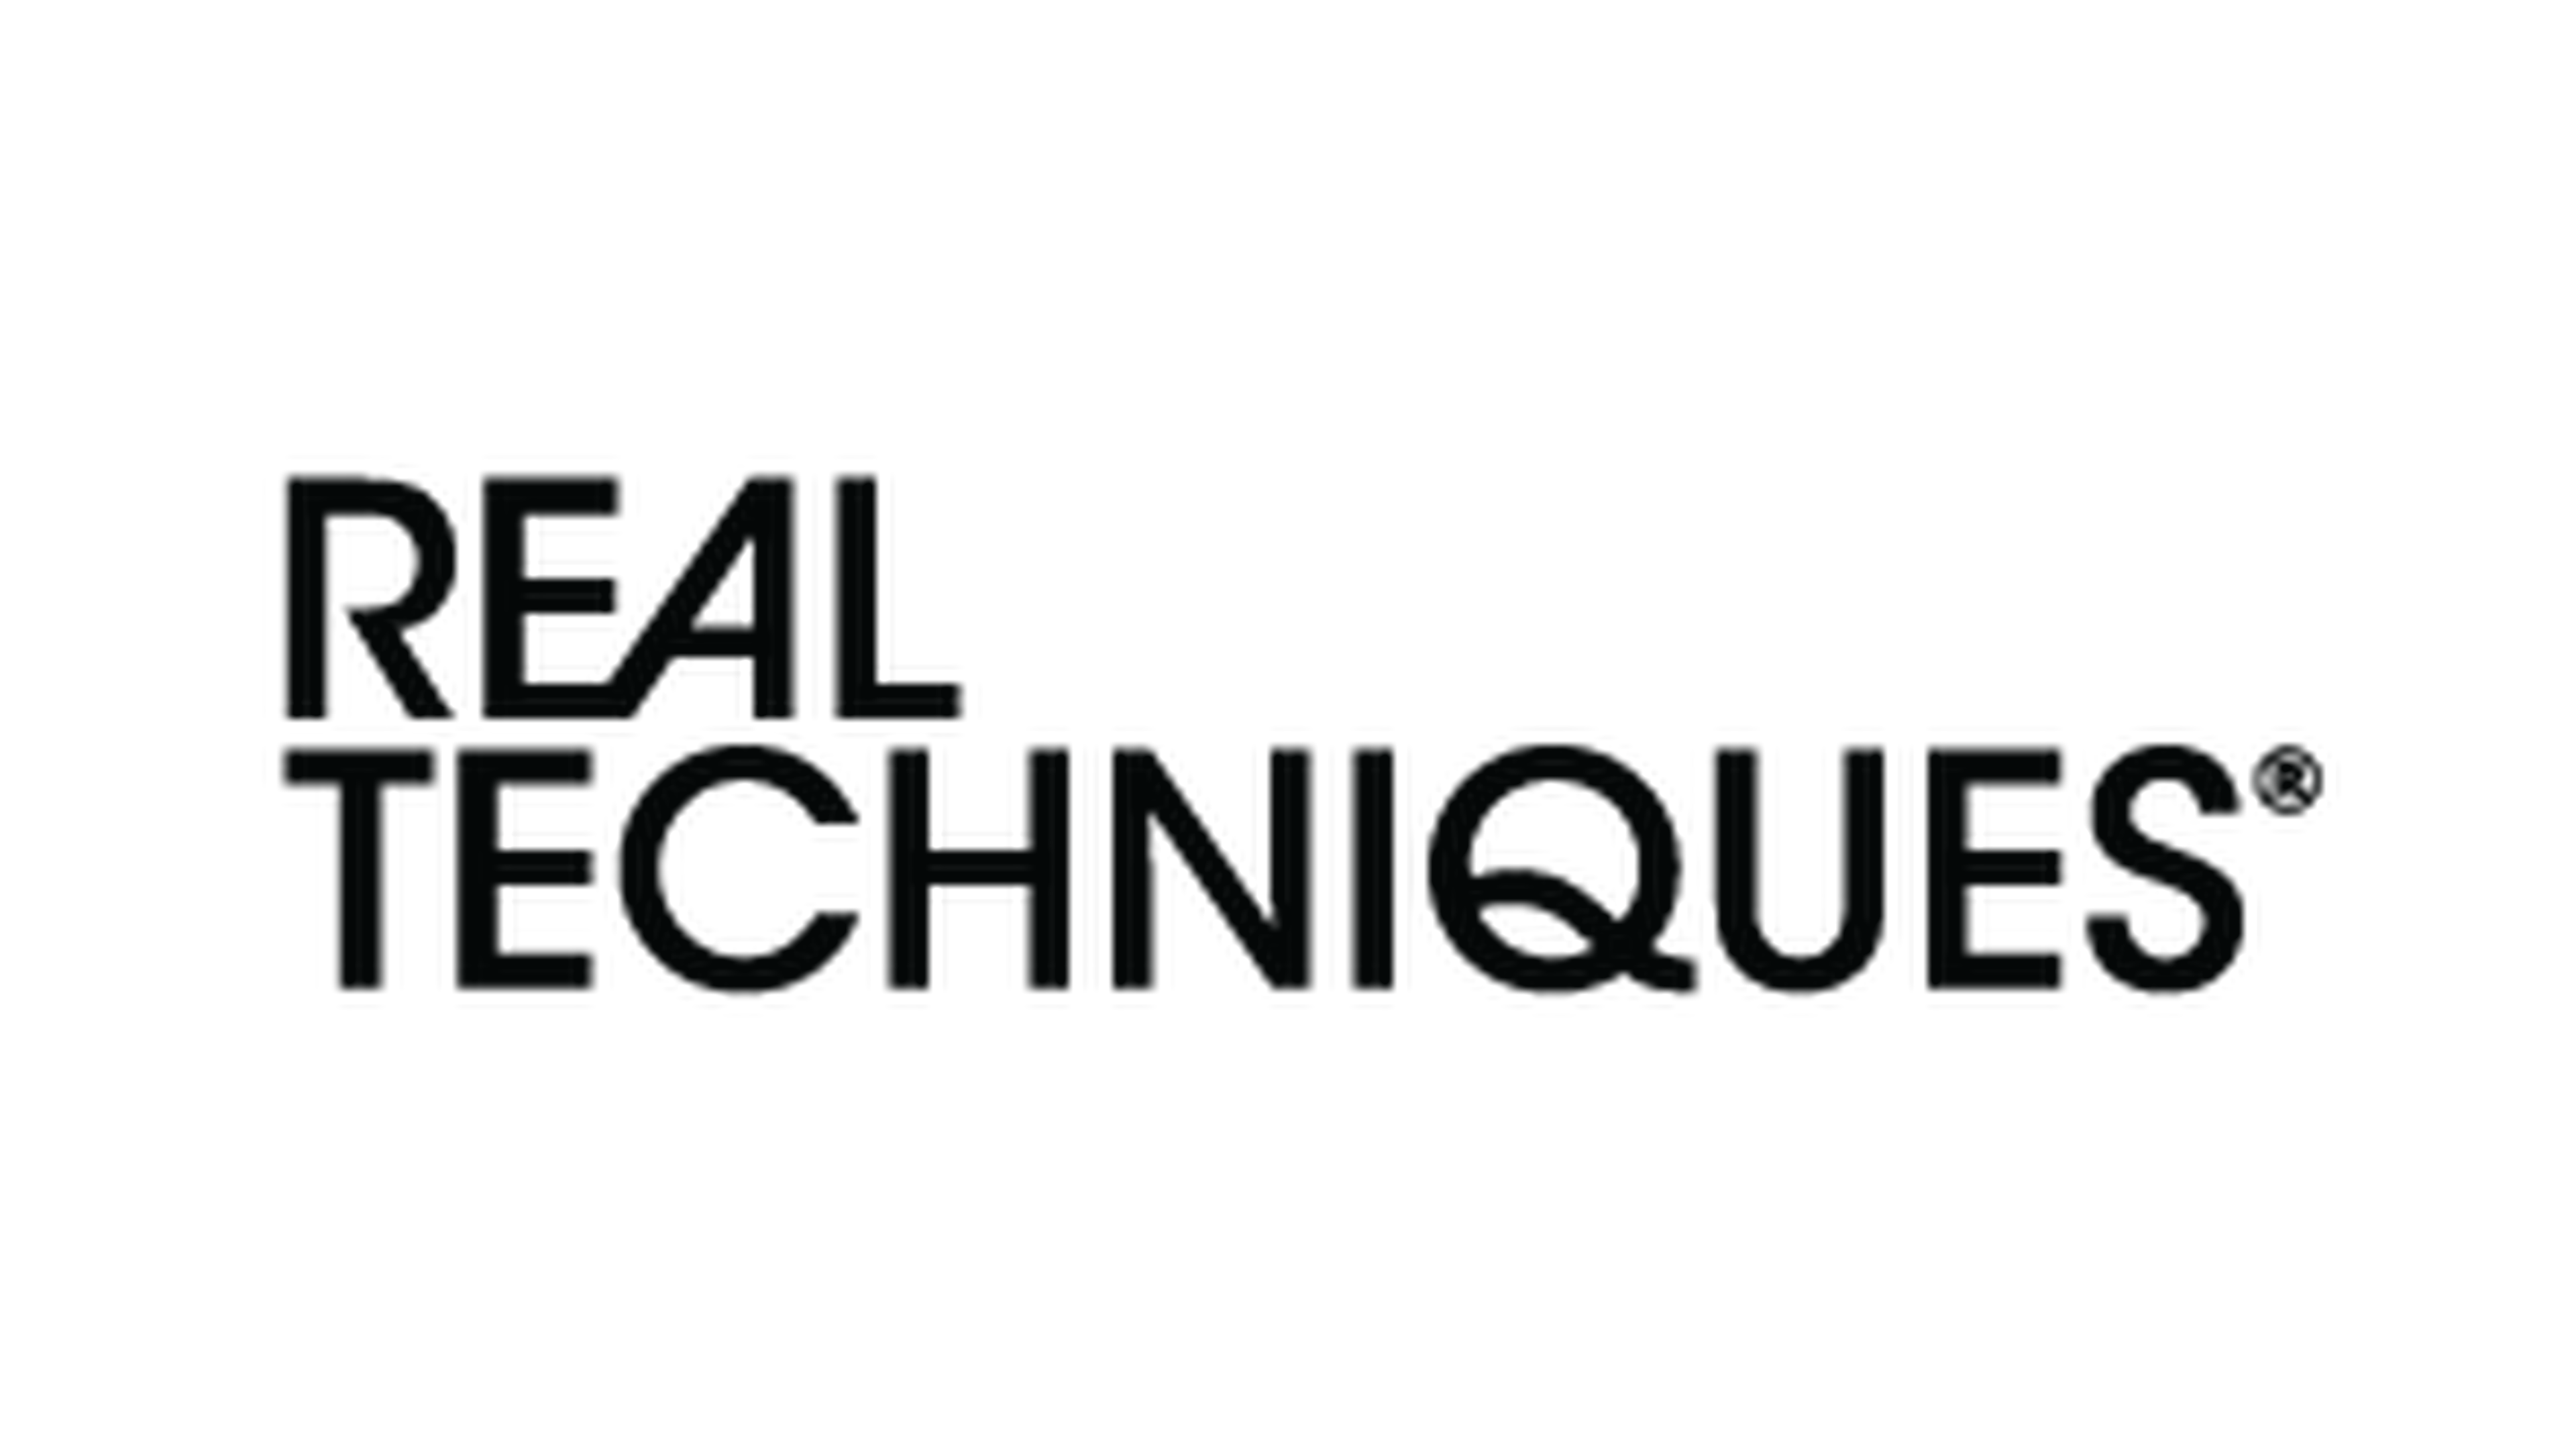 Real Techniques logotype